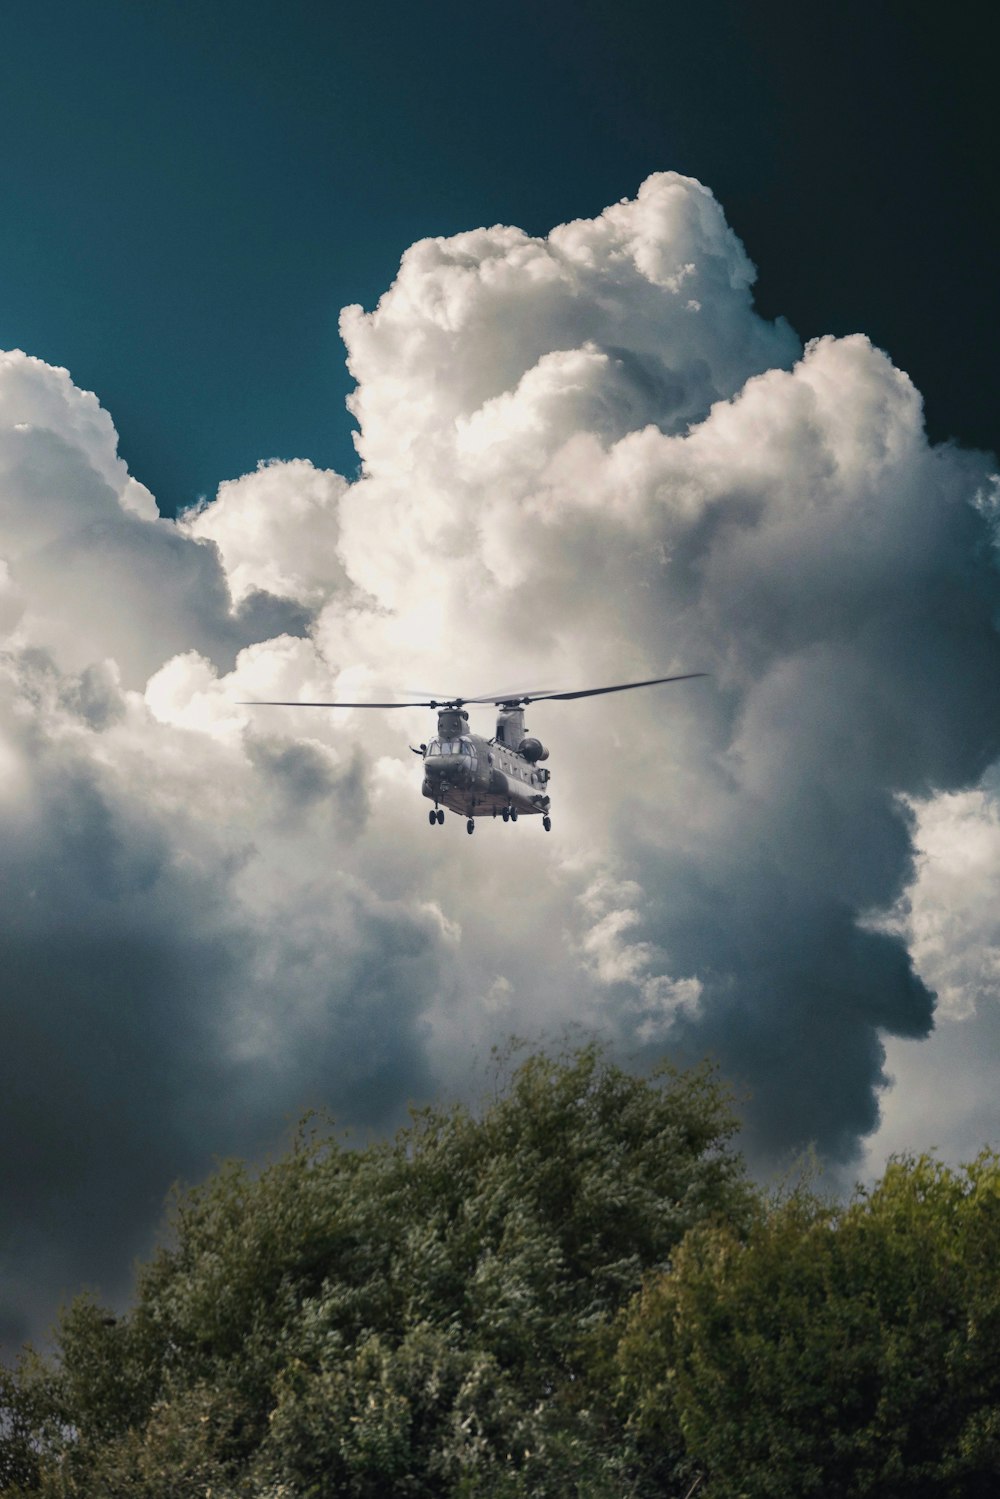 a helicopter flying through a cloudy blue sky